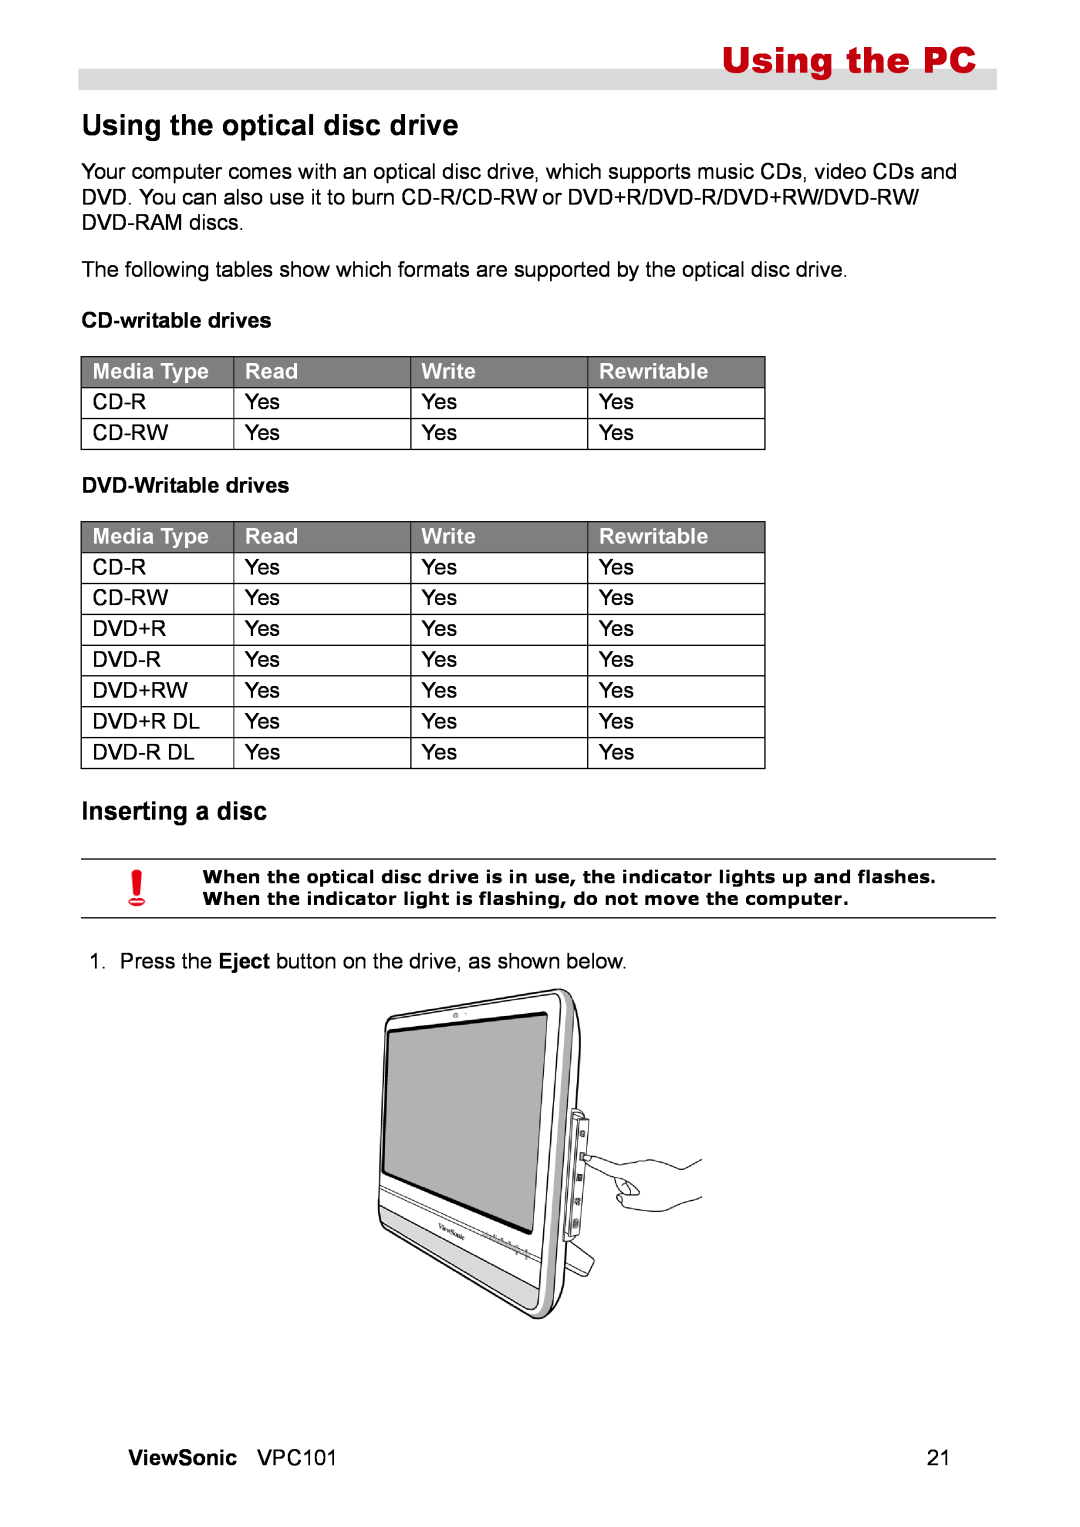 ViewSonic VPC101 manual Using the optical disc drive, Inserting a disc, Media Type, Read, Write, Rewritable, Using the PC 